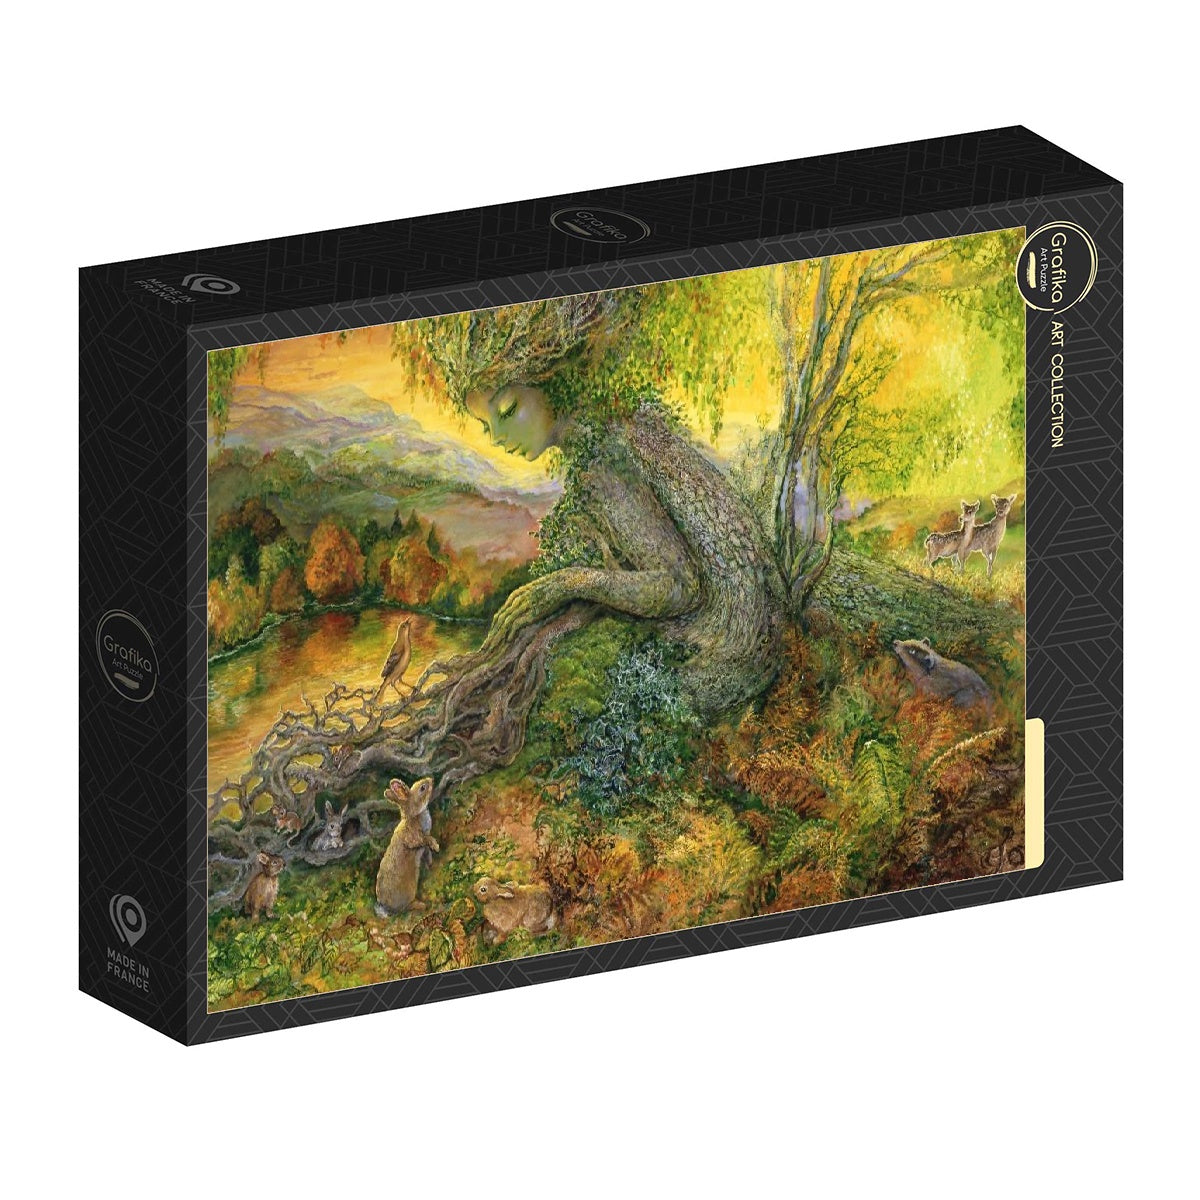 Autumn Serenade by Josephine Wall, 1000 Piece Puzzle